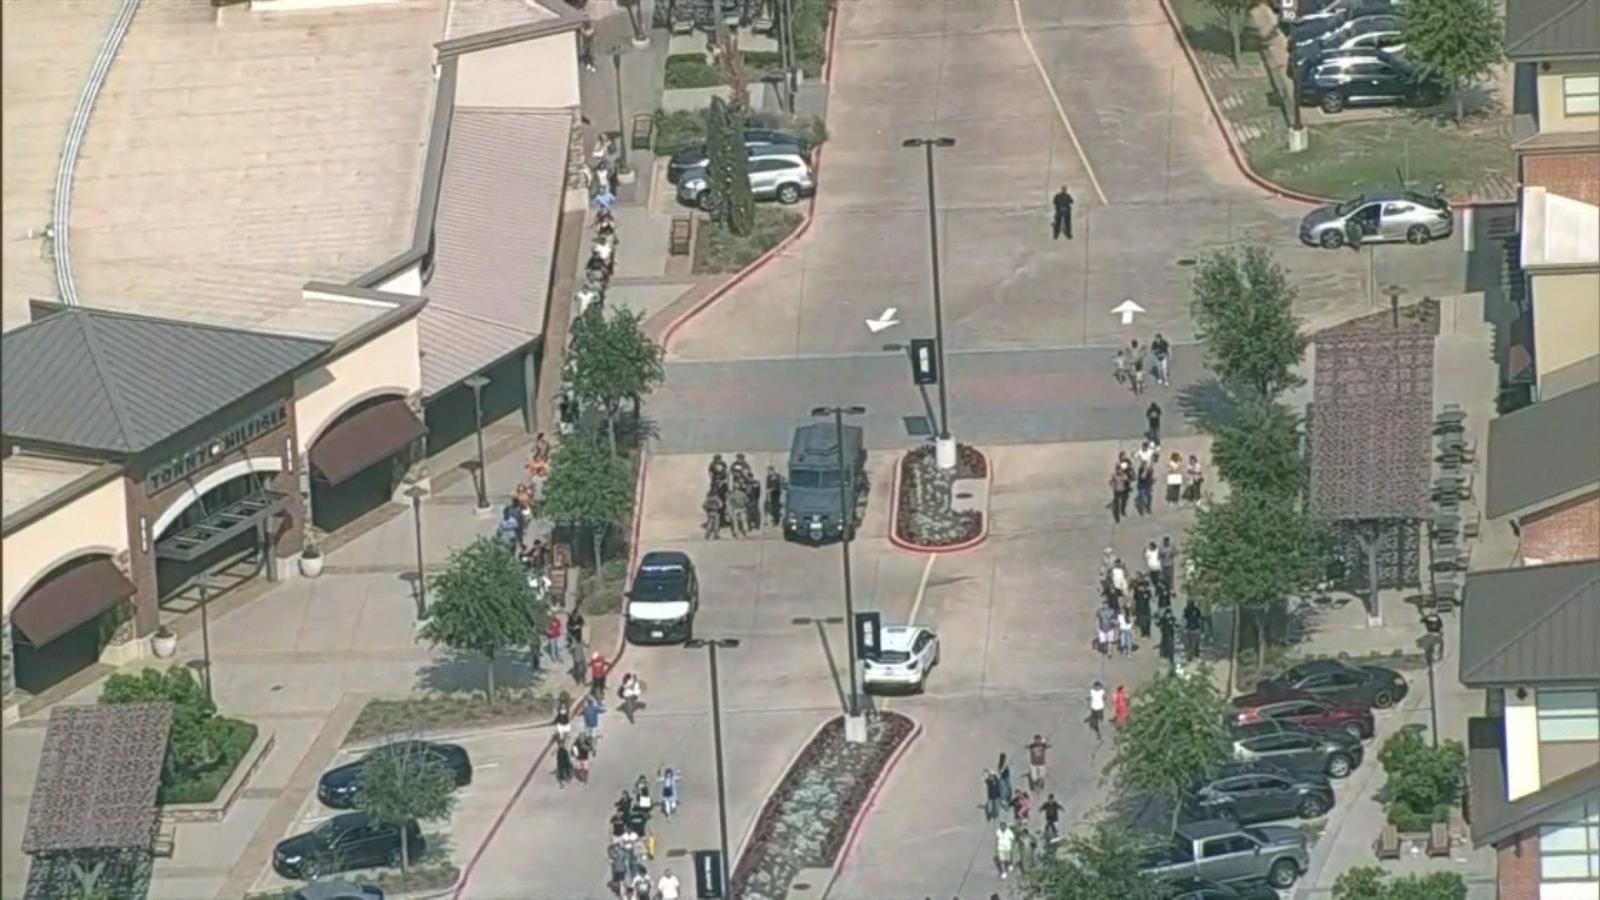 They report an active attacker in a mall in Dallas, Texas |  Video